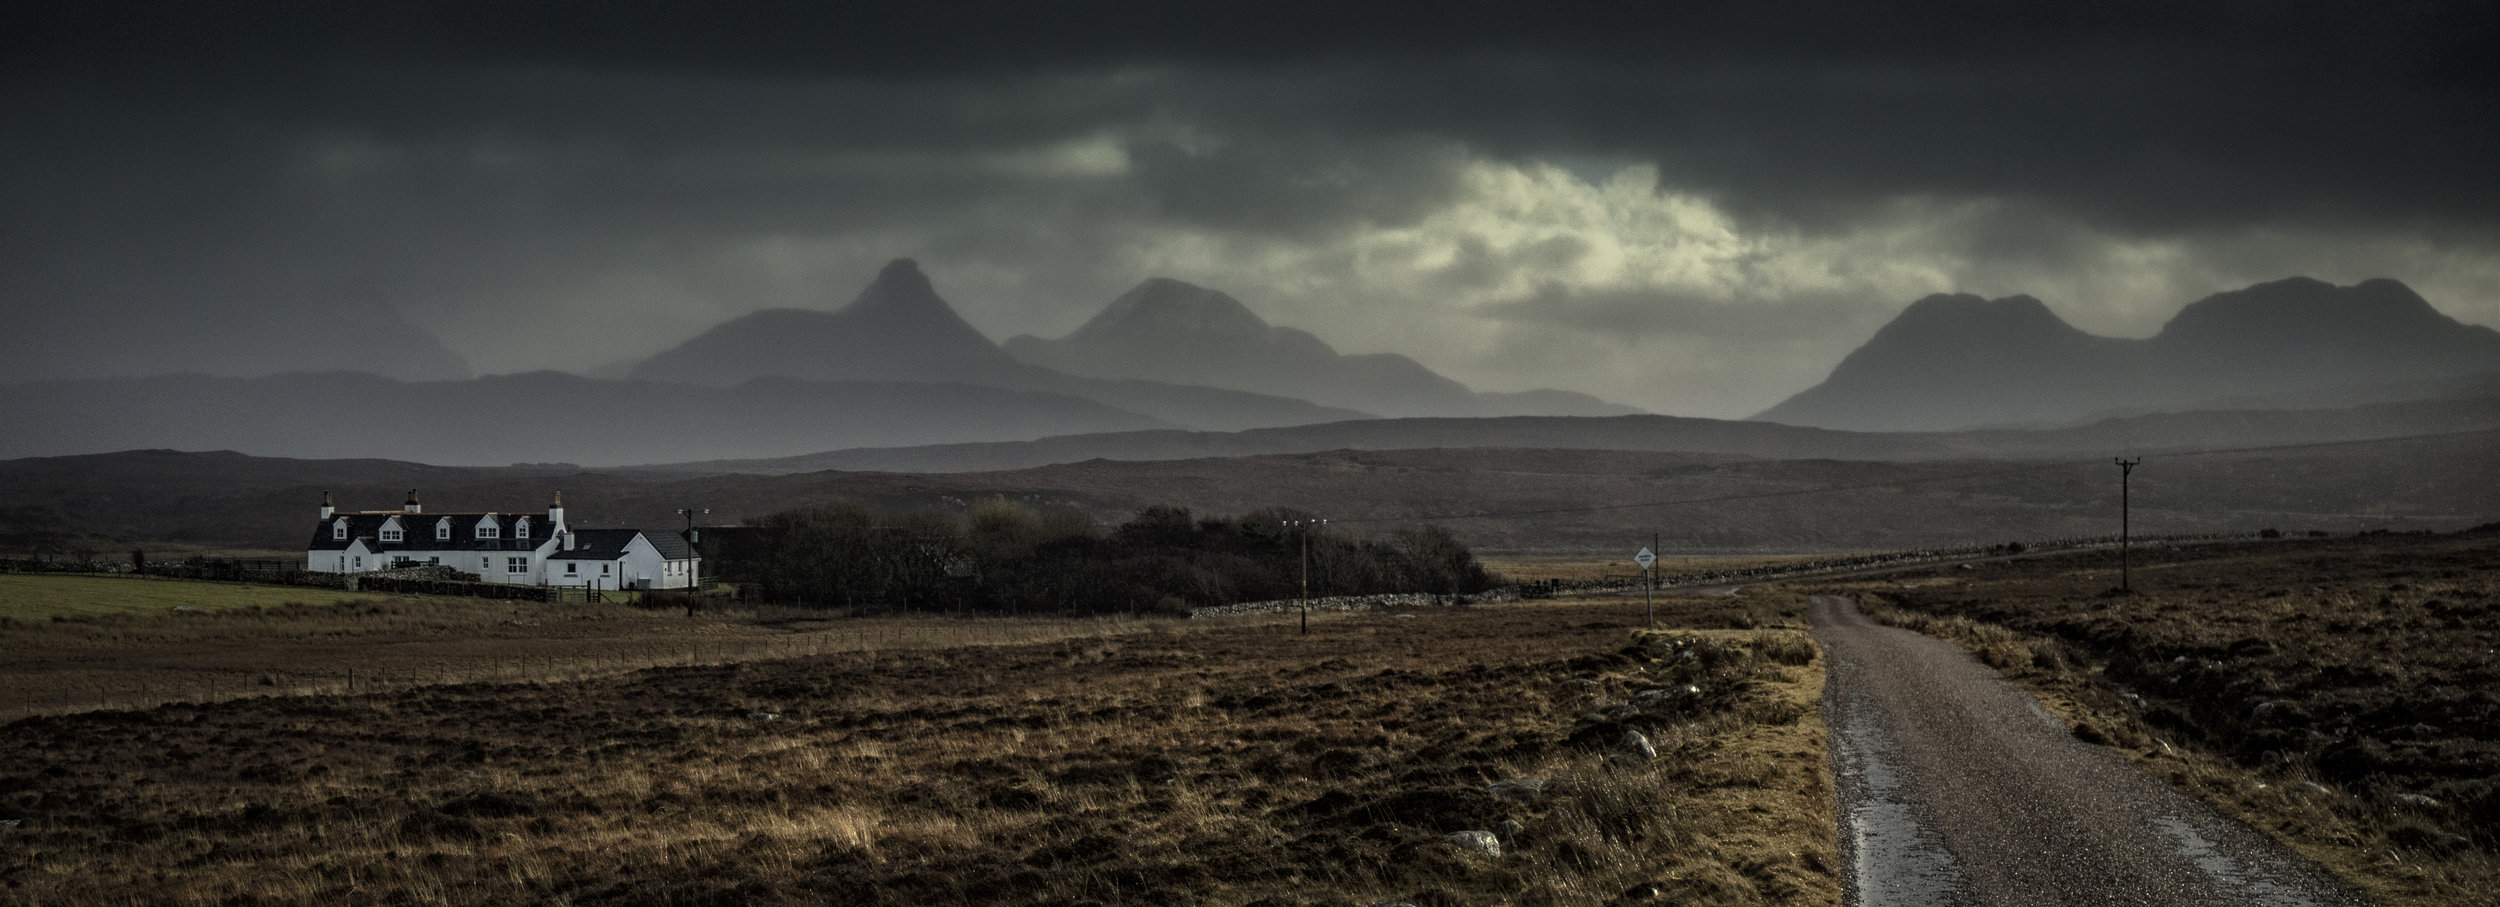 Stac Polly, Suilven and the Inverpolly Mountain Range, Highlands, Scotland